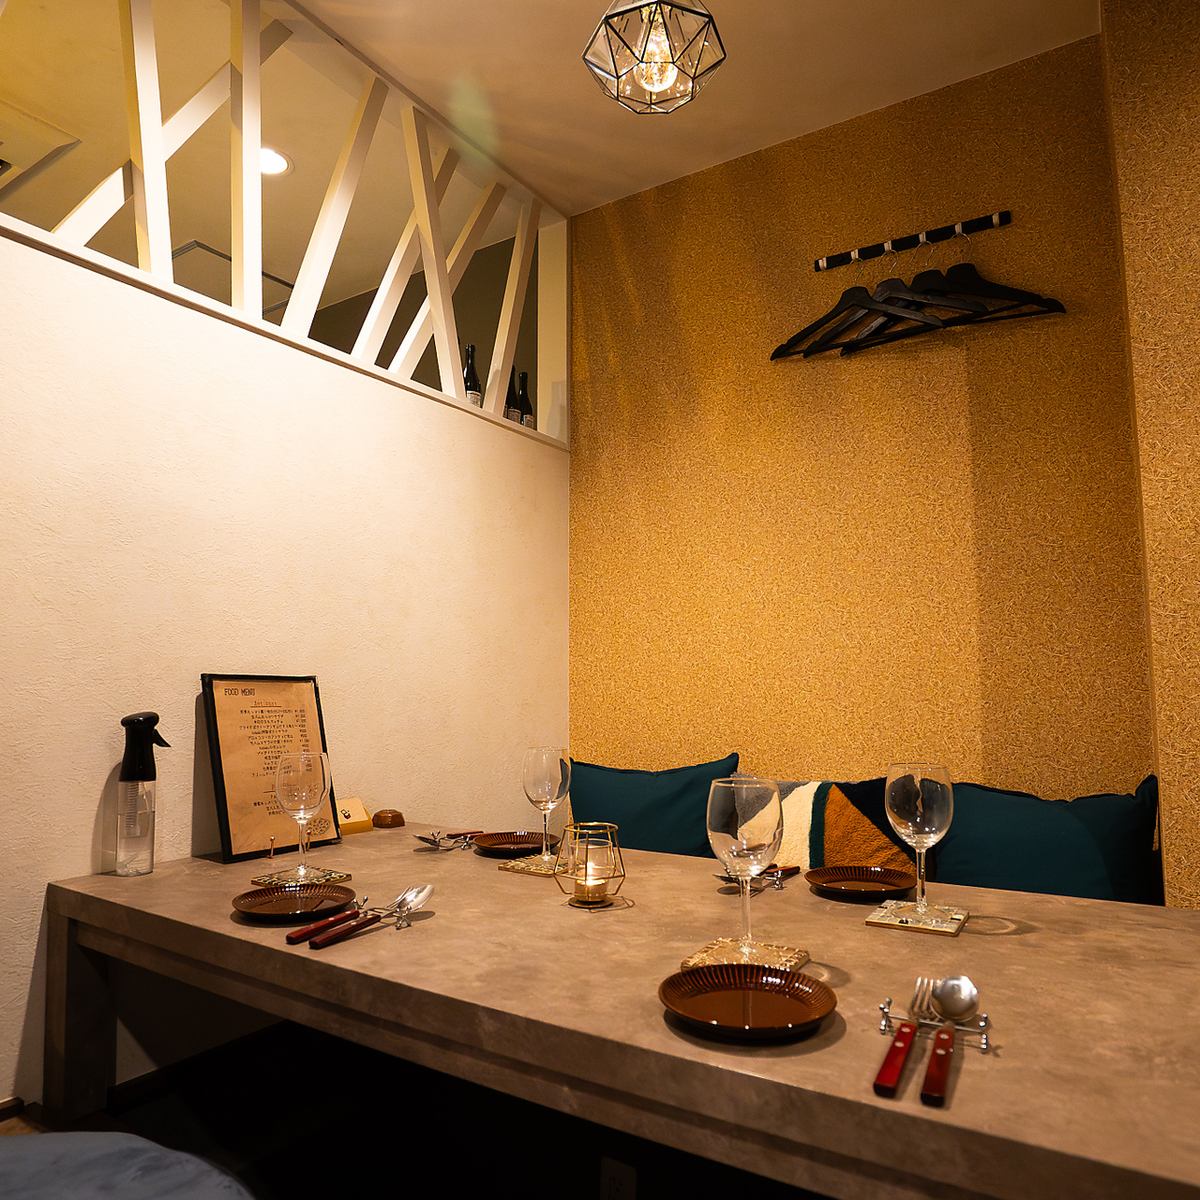 We offer private rooms where you can relax.Perfect for girls' night out◎